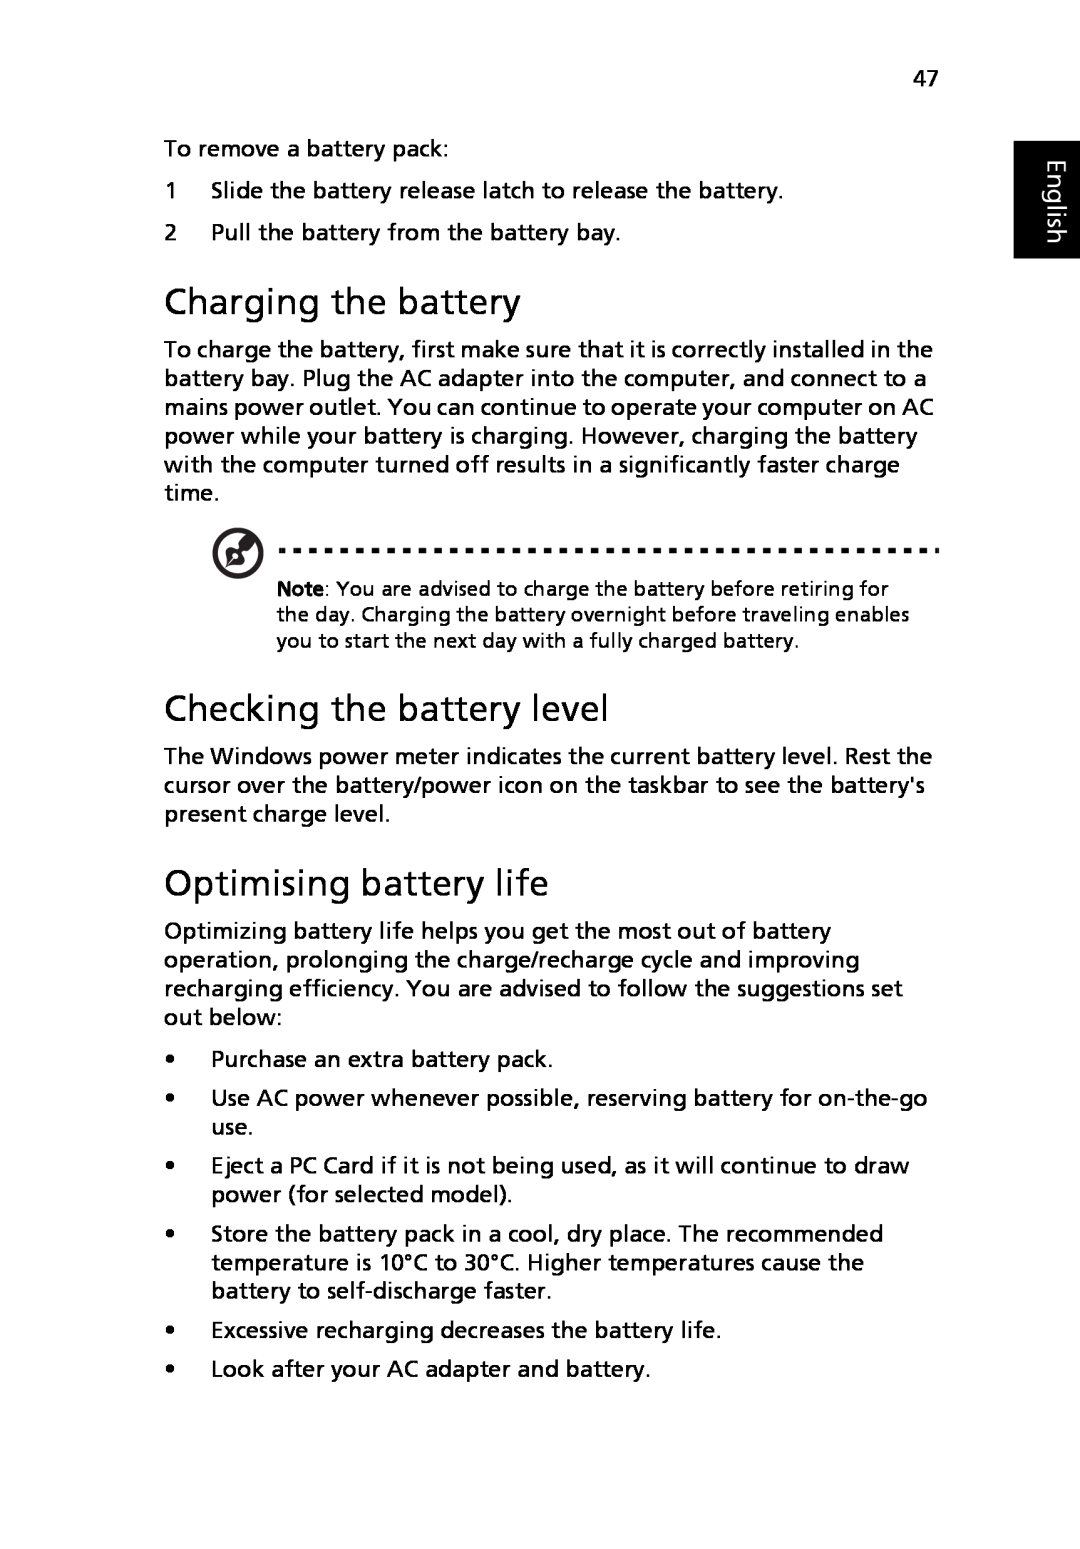 Acer 5010 Series, 5410 Series manual Charging the battery, Checking the battery level, Optimising battery life, English 